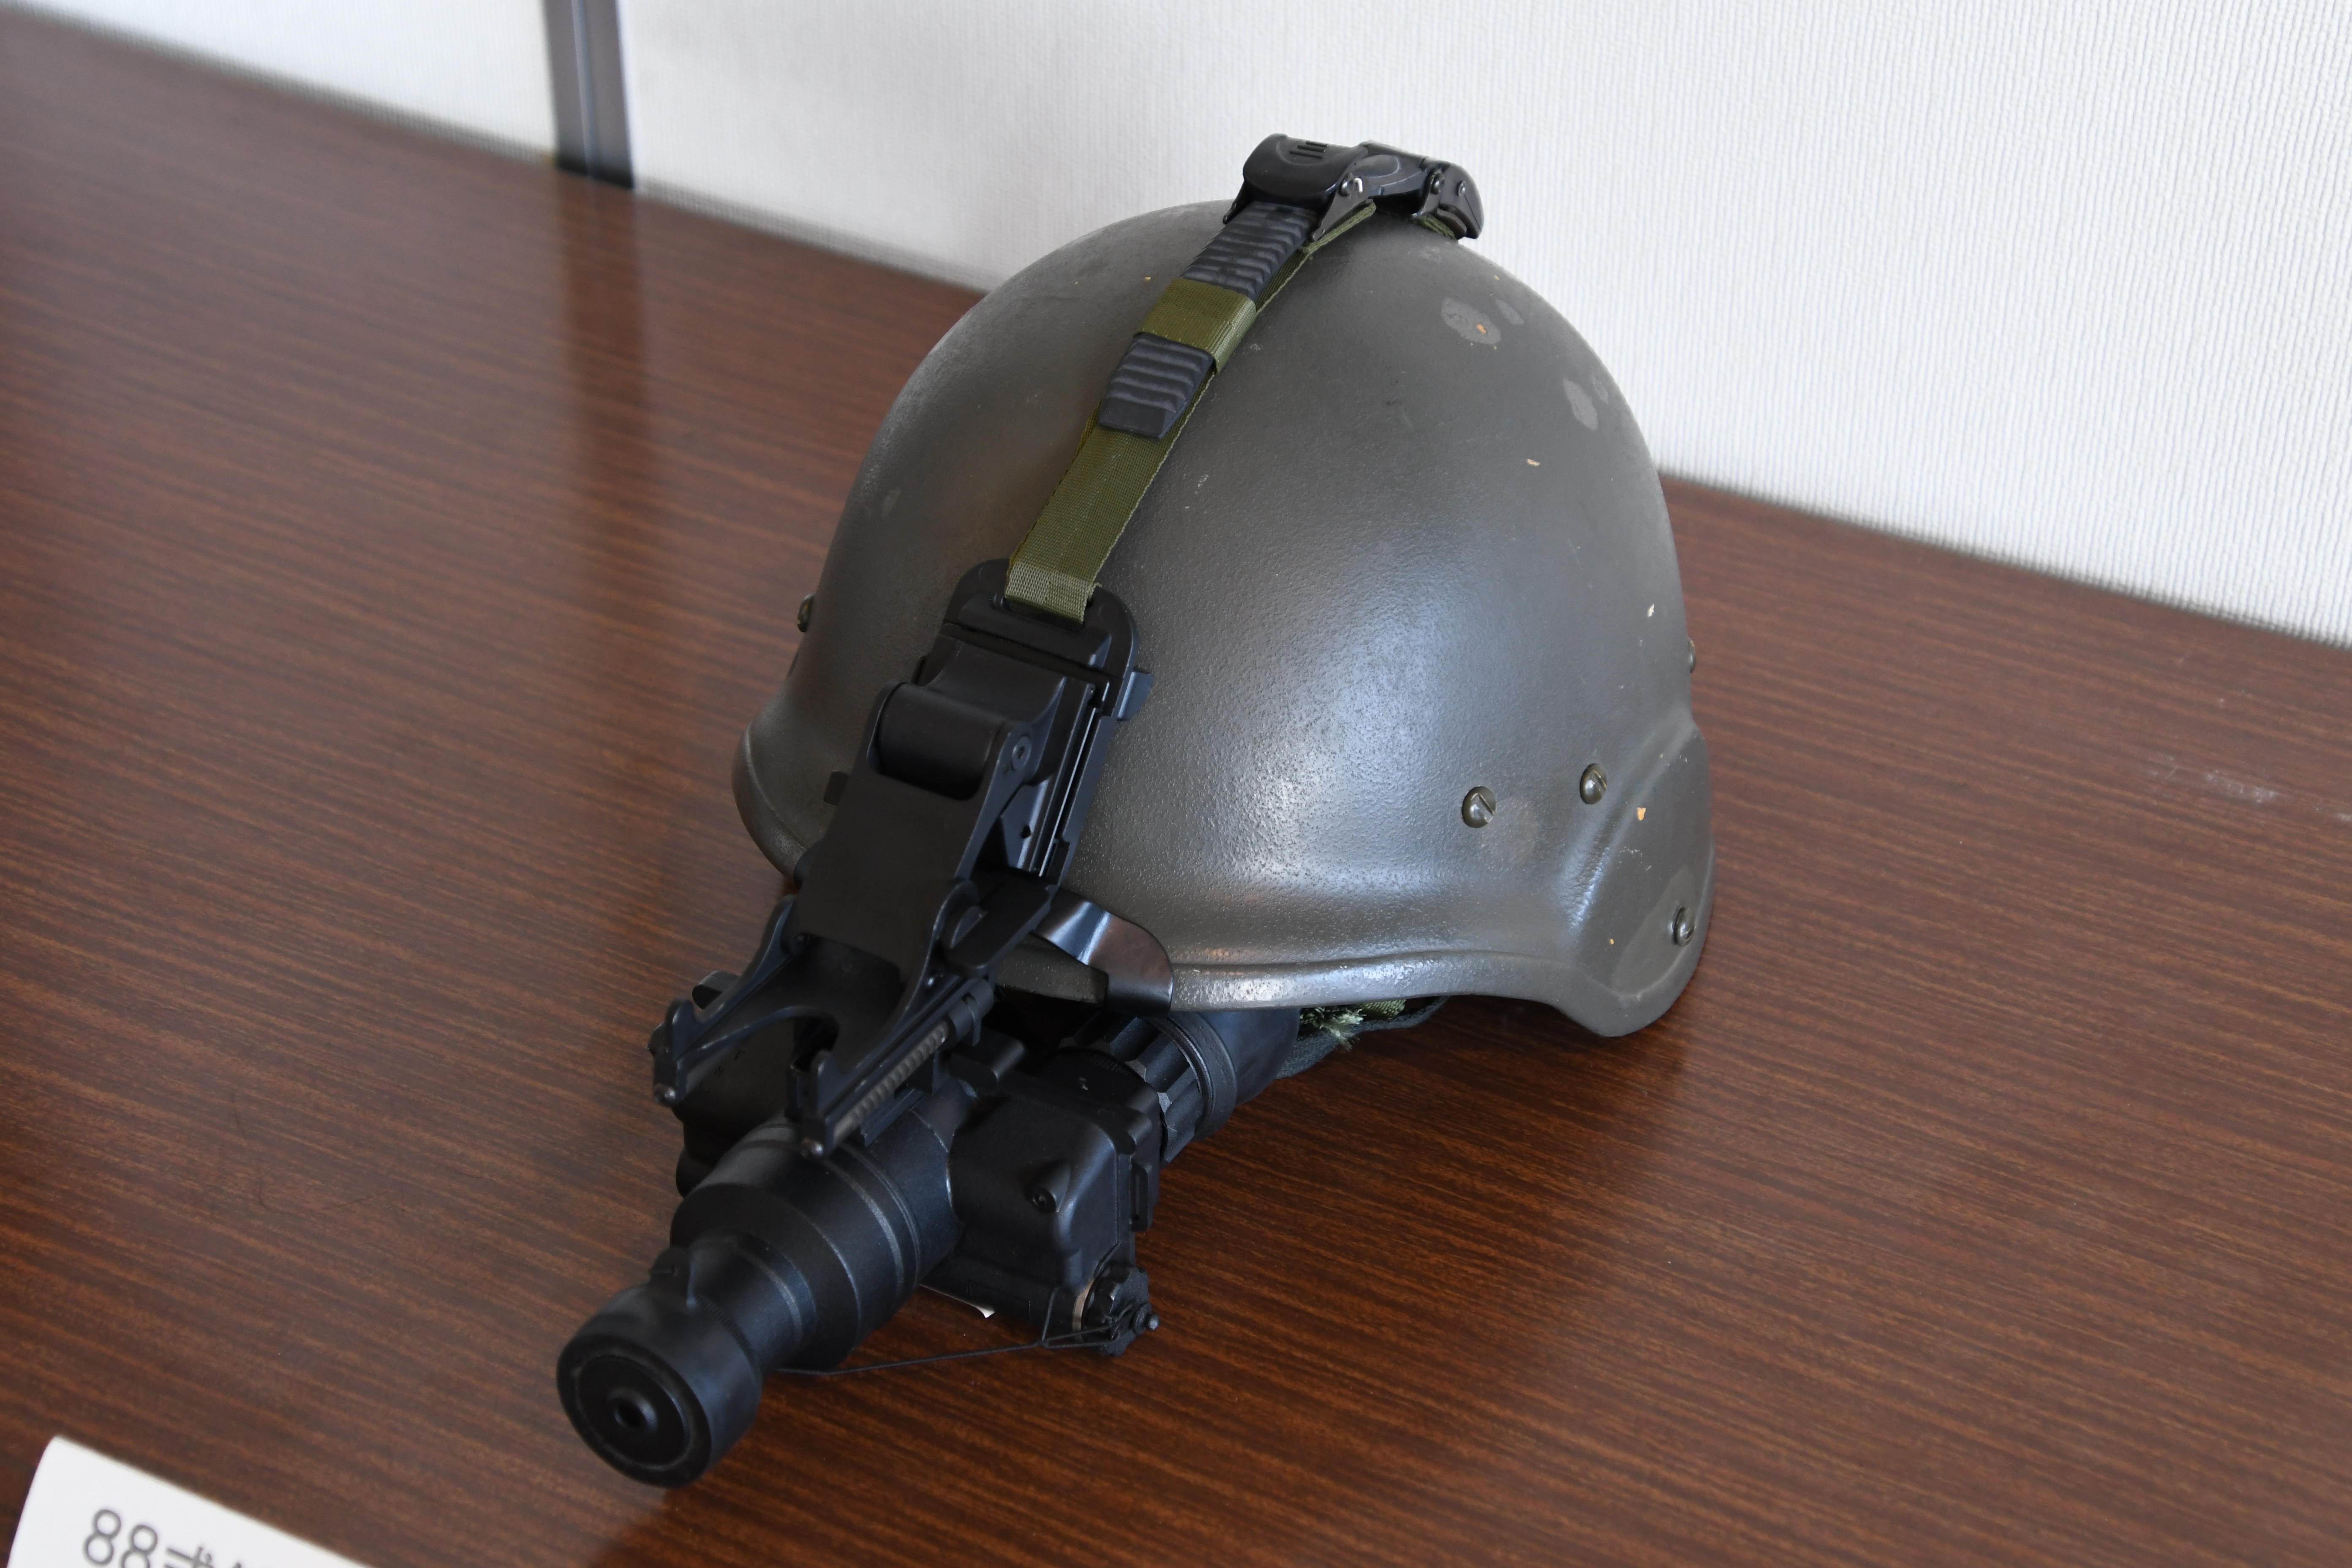 JASDF Type 88 Helmet with NVS-7 Night vision device at Aibano Sub Base October 14, 2018 02.jpg